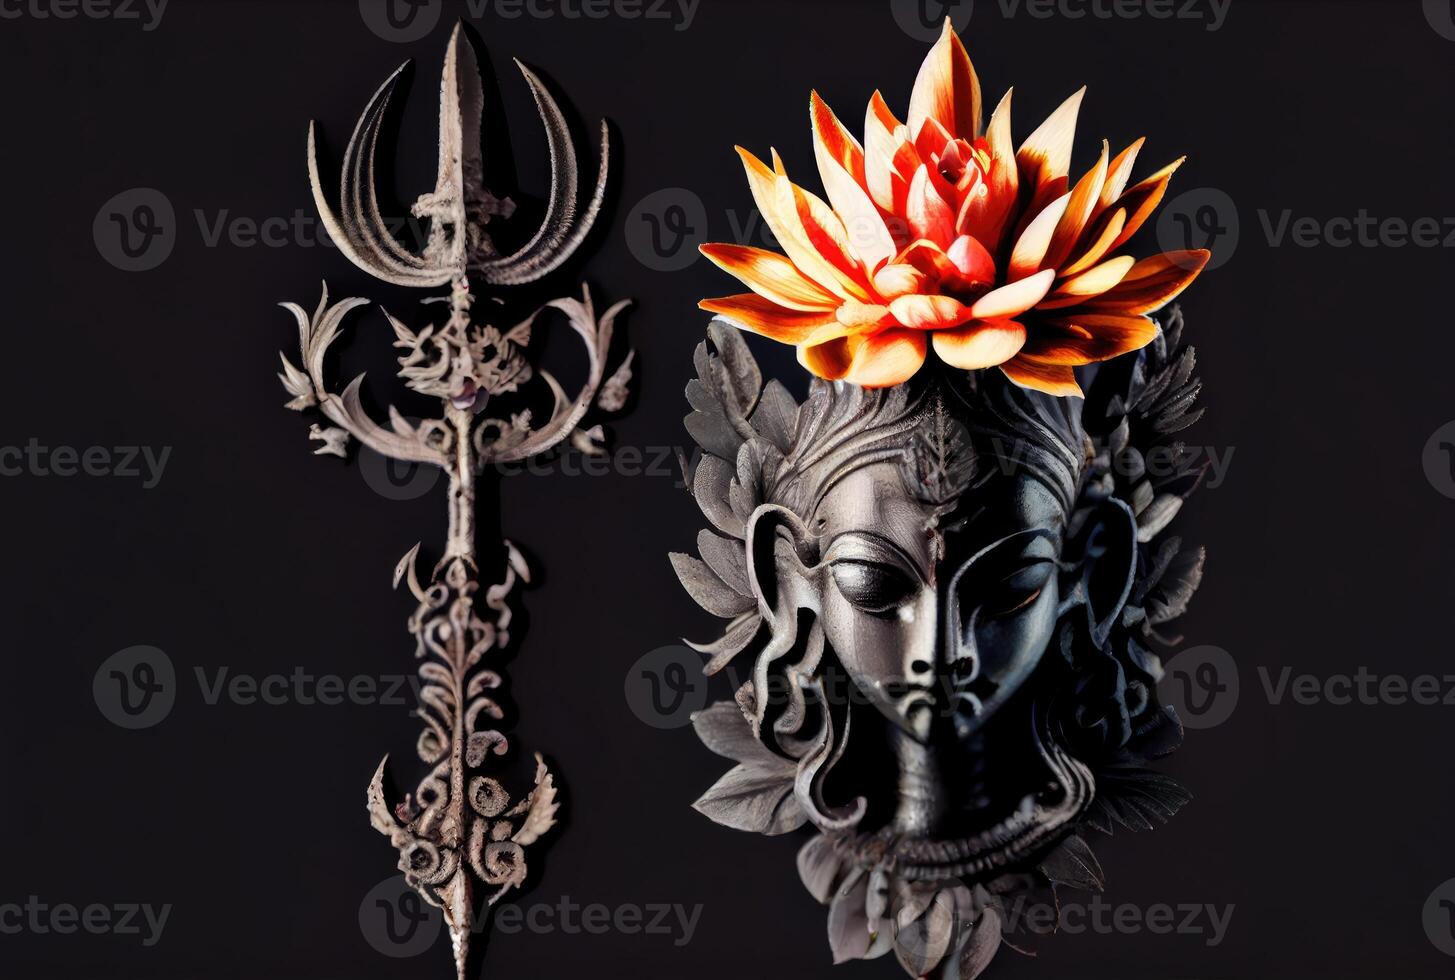 Maha Shivratri concept with trident sword sculpture background. Indian Culture and festival. photo